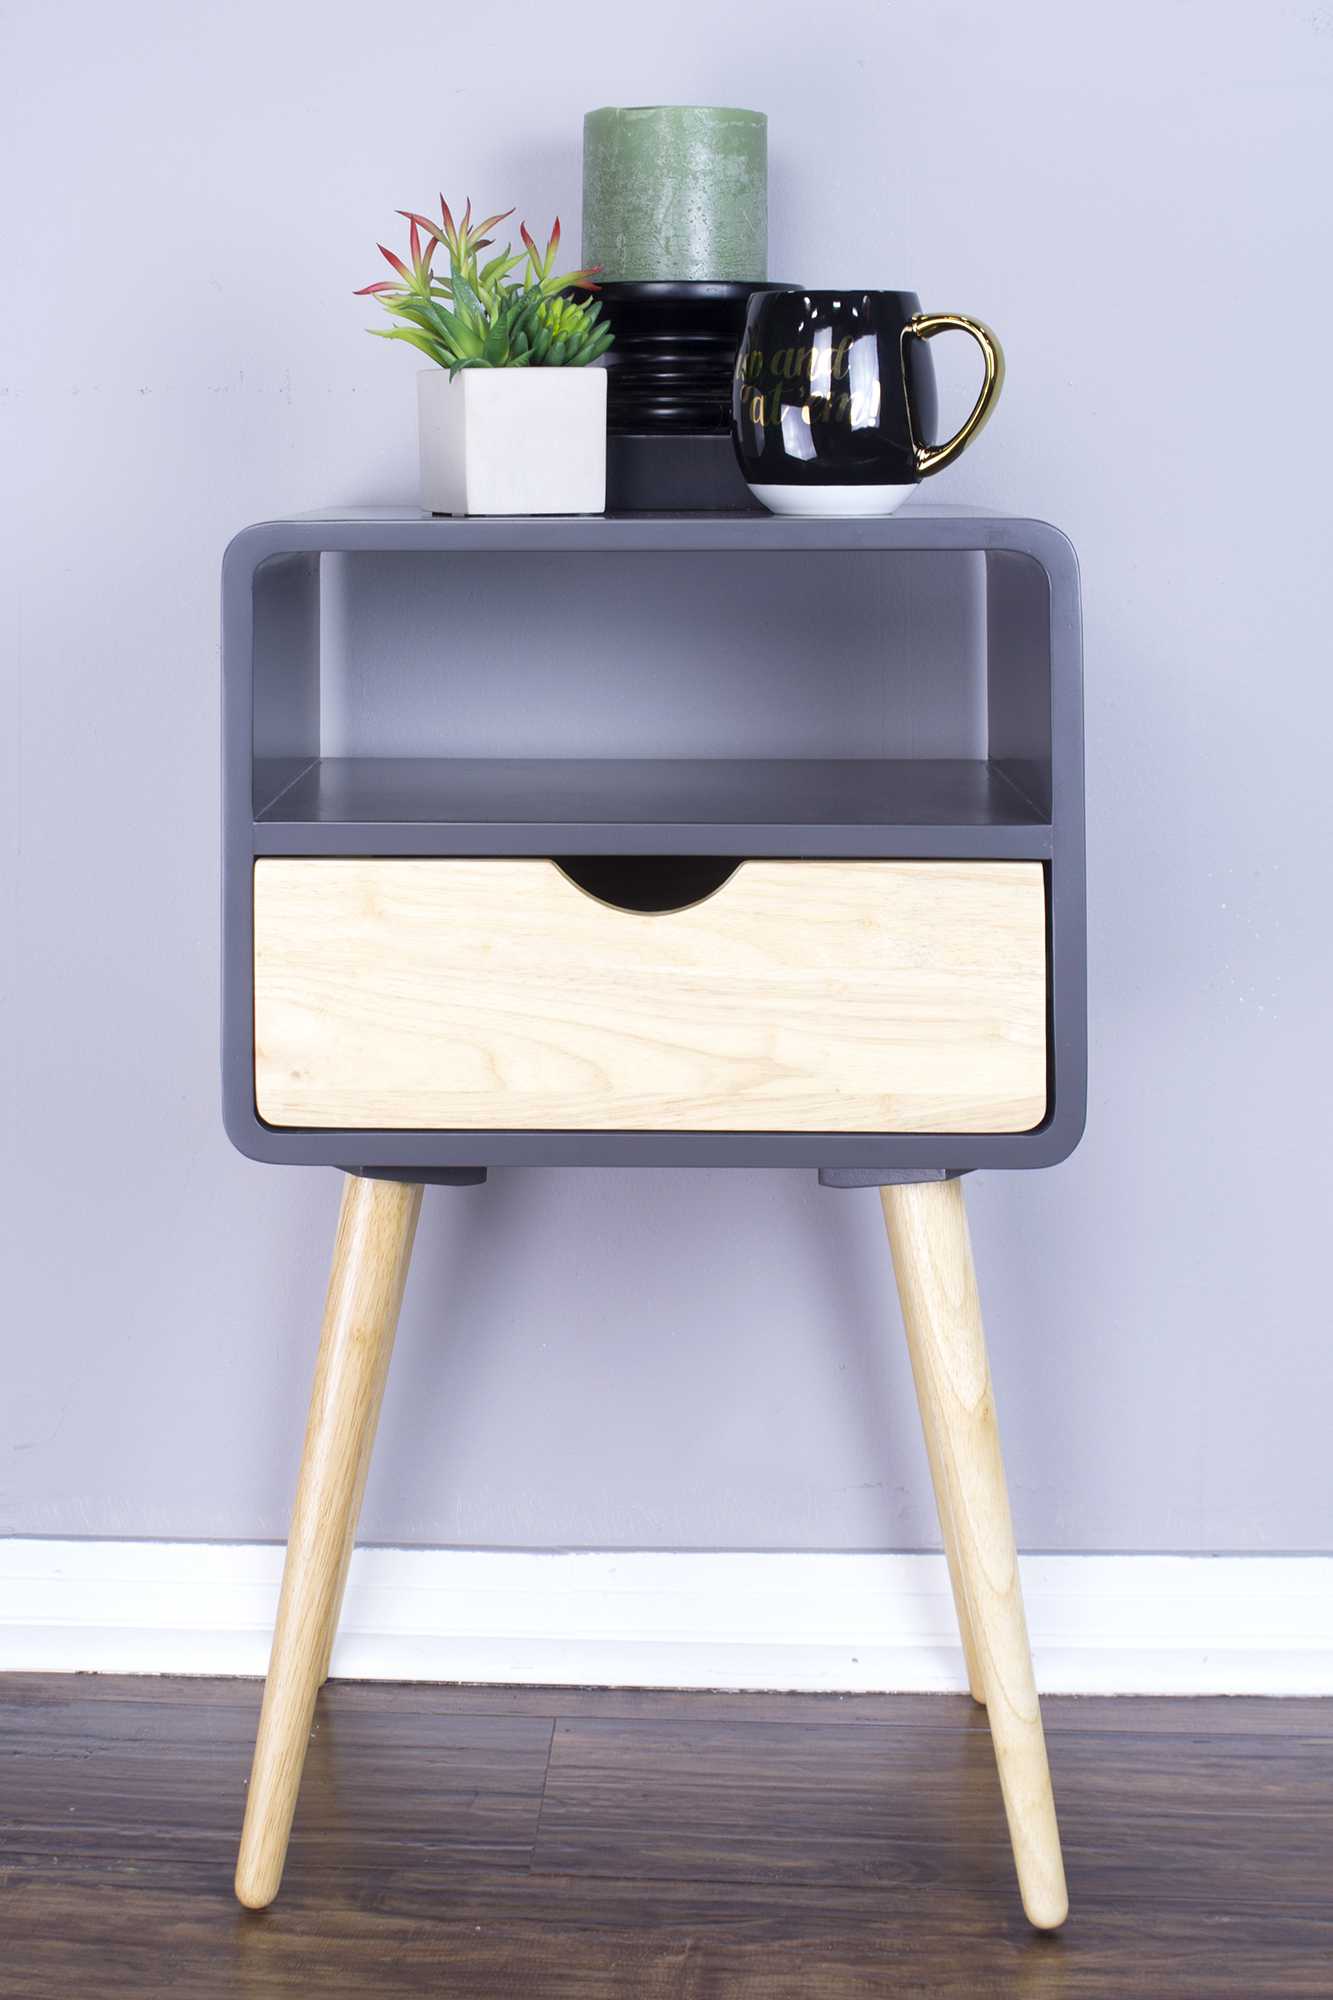 16" X 12" X 26" Graphite MDF Wood End Table with Drawer and Shelf